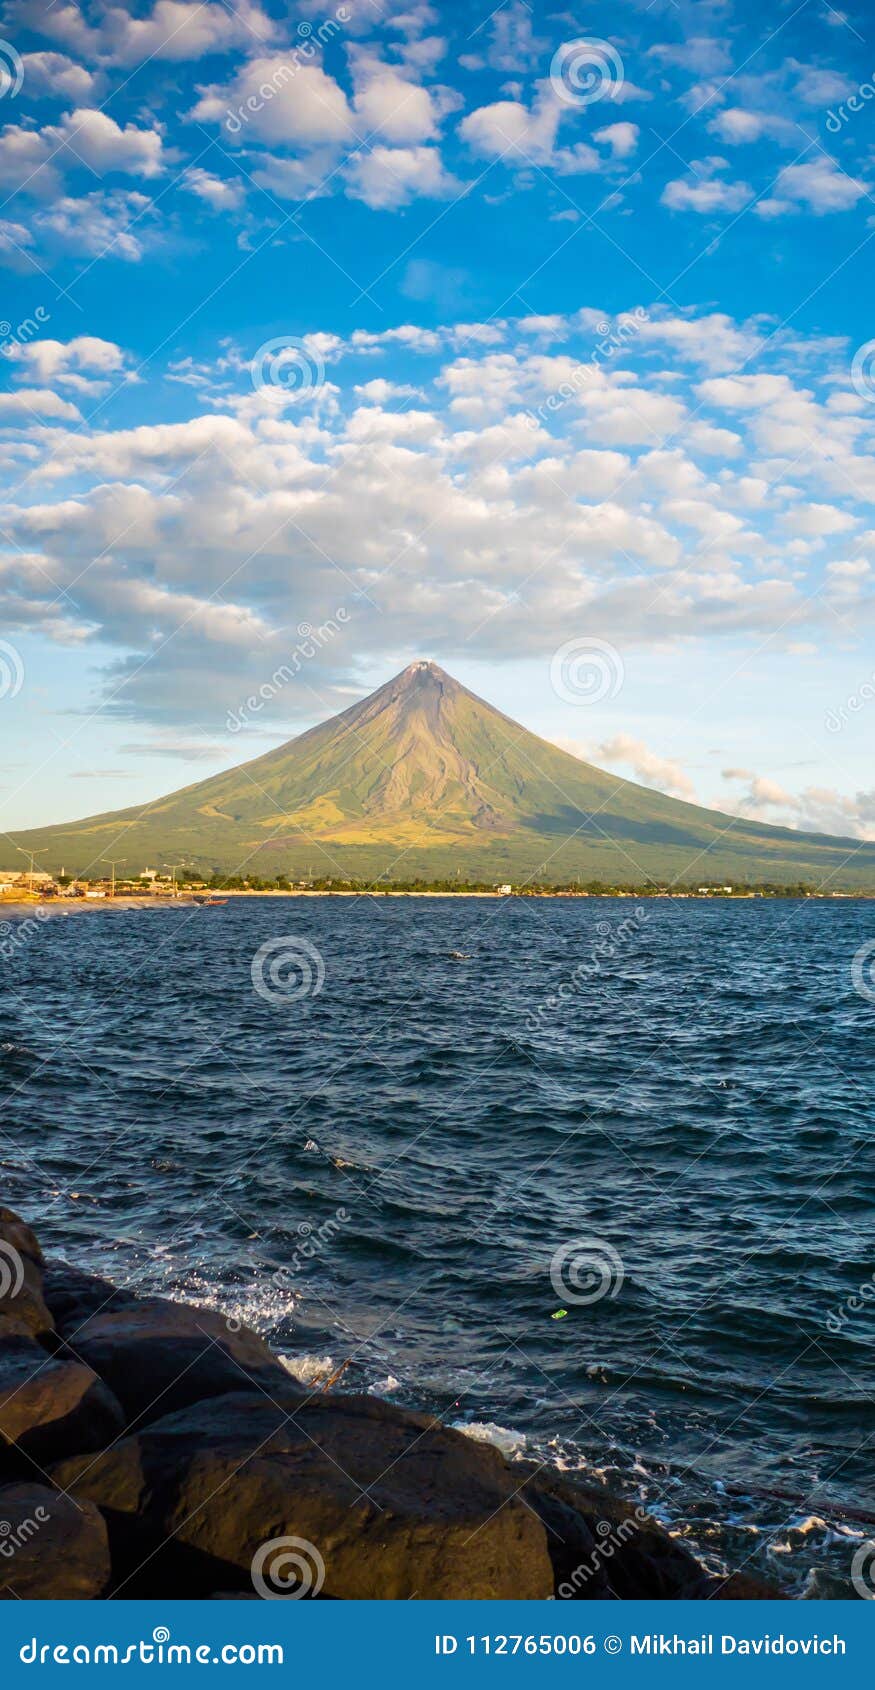 mayon volcano is an active stratovolcano in the province of albay in bicol region, on the island of luzon in the